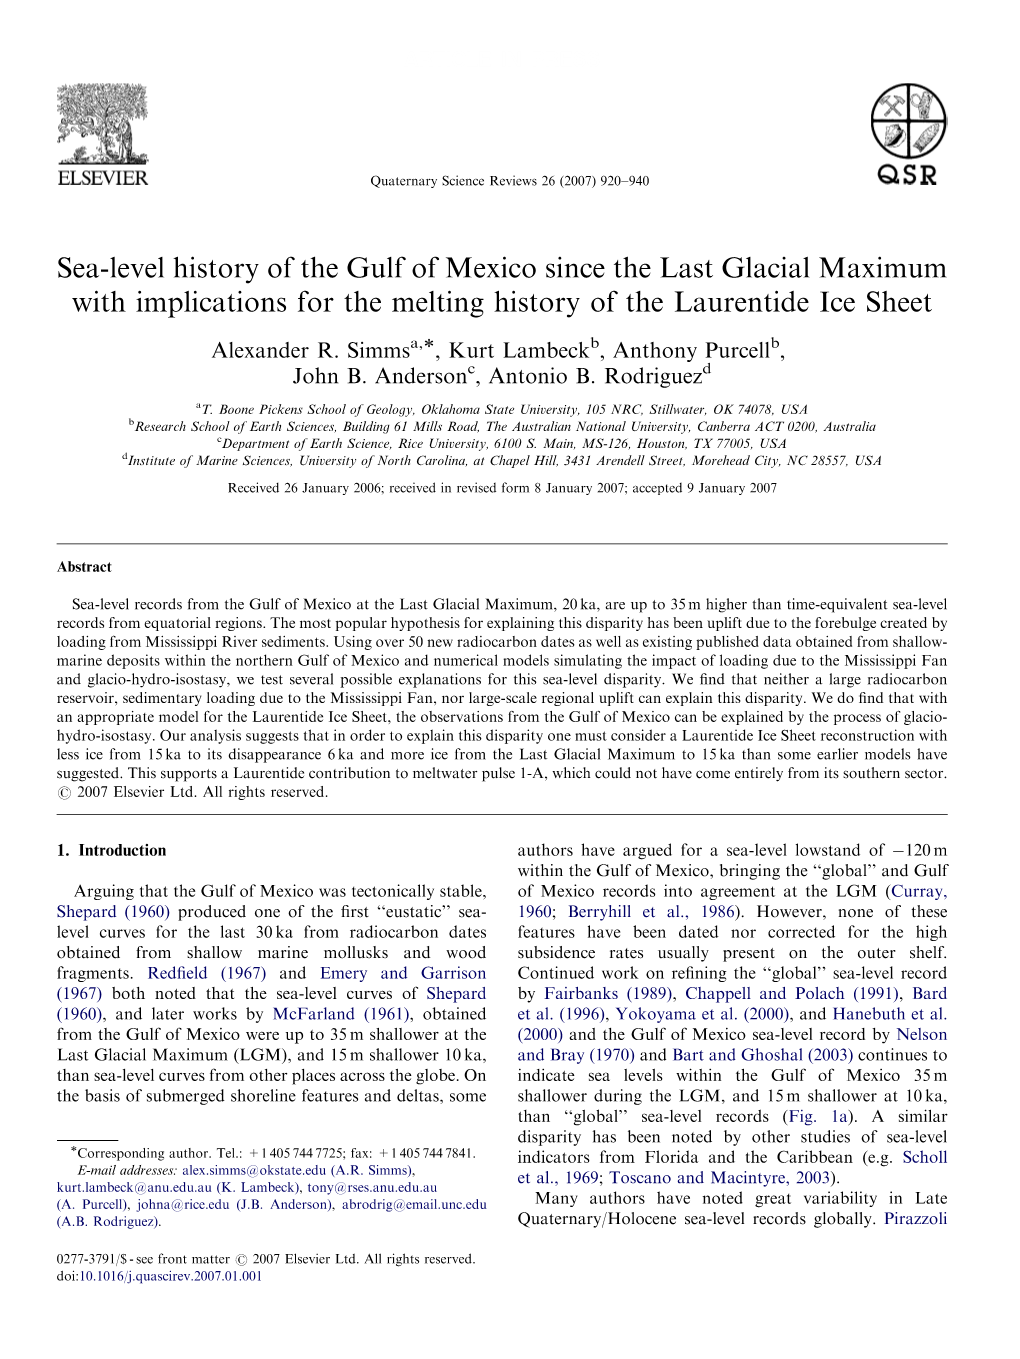 Sea-Level History of the Gulf of Mexico Since the Last Glacial Maximum with Implications for the Melting History of the Laurentide Ice Sheet